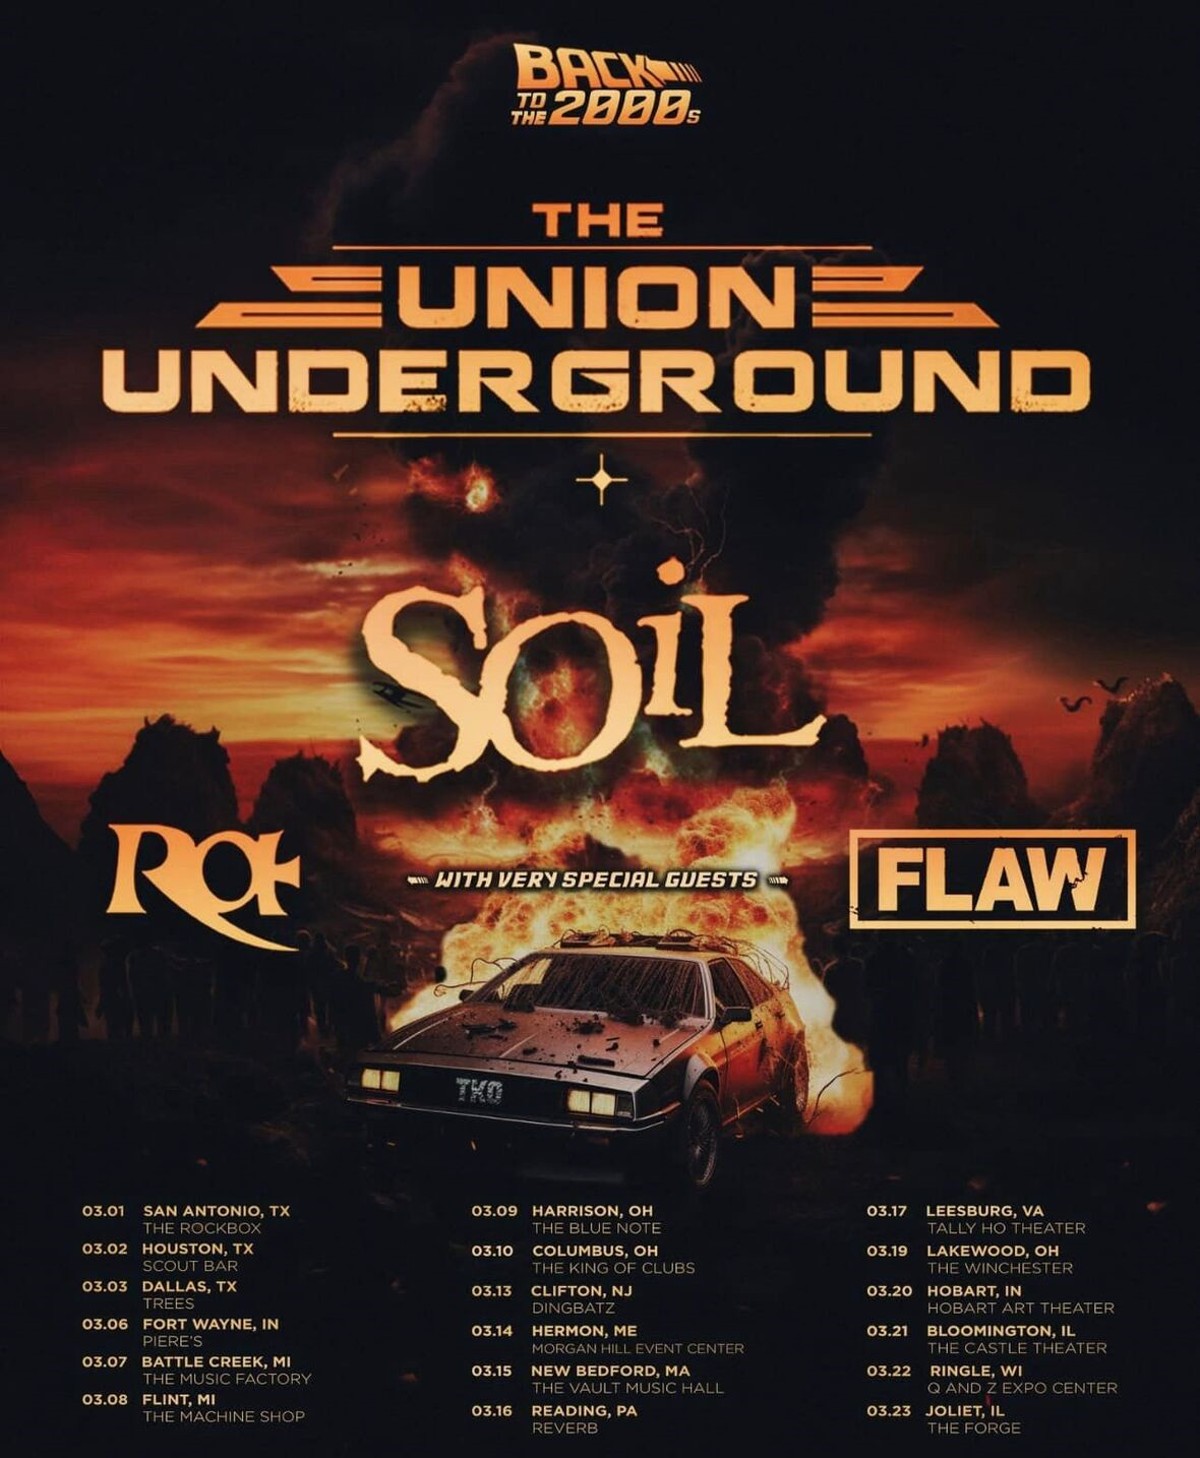 The Union Underground 'Back To The 2000's Tour' flyer